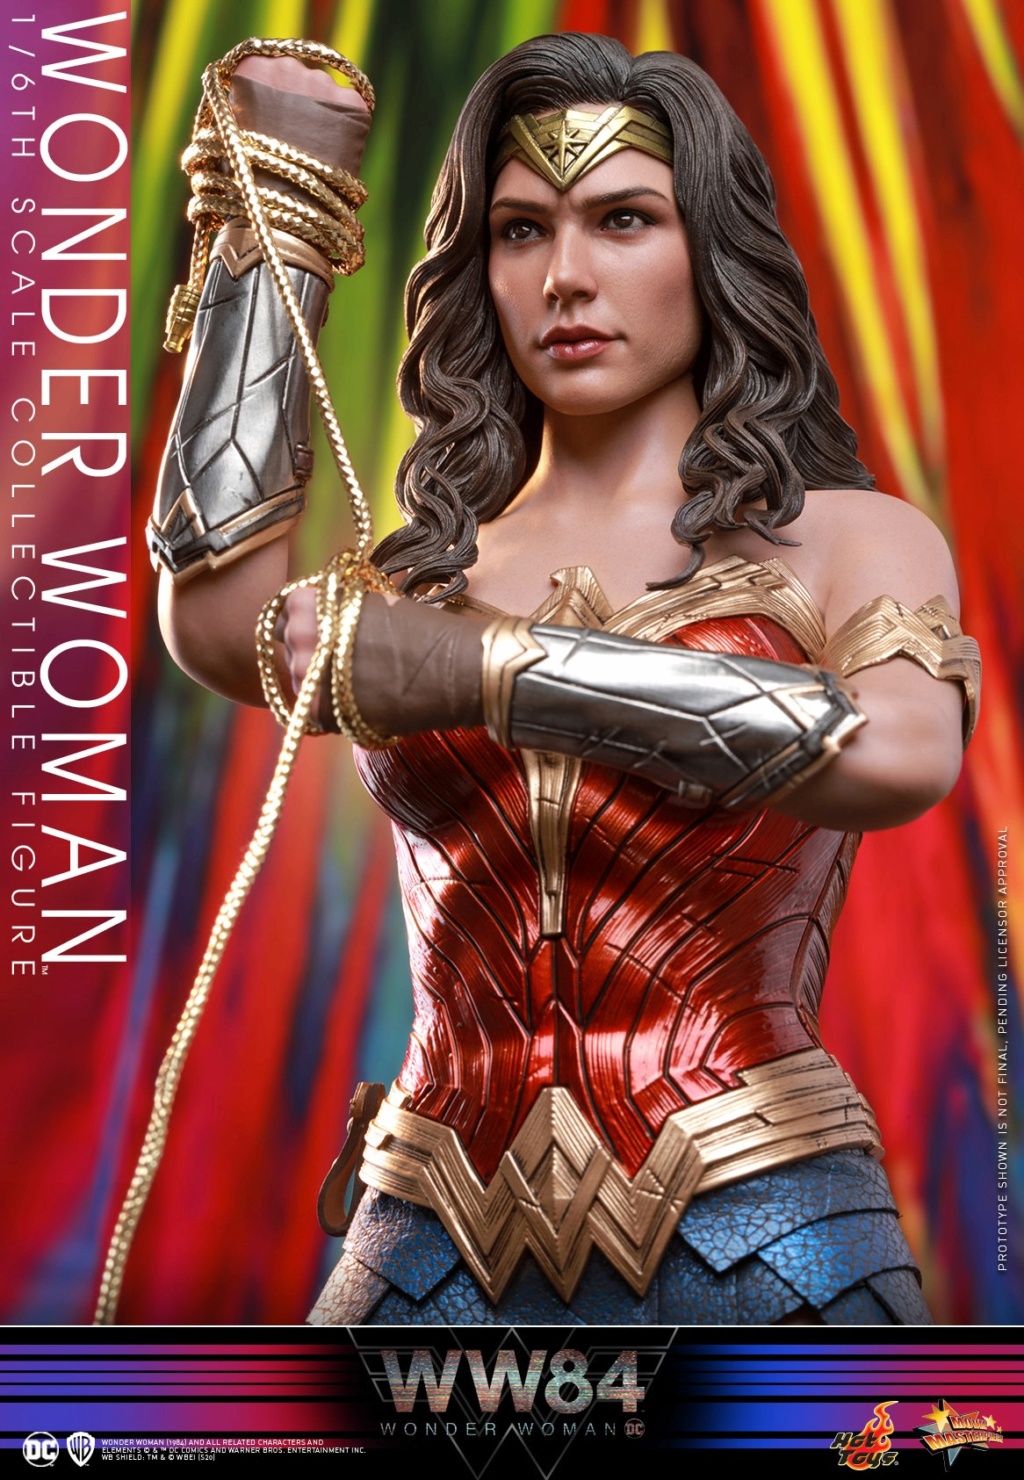 NEW PRODUCT: HOT TOYS: WONDER WOMAN 1984 WONDER WOMAN 1/6TH SCALE COLLECTIBLE FIGURE 10284